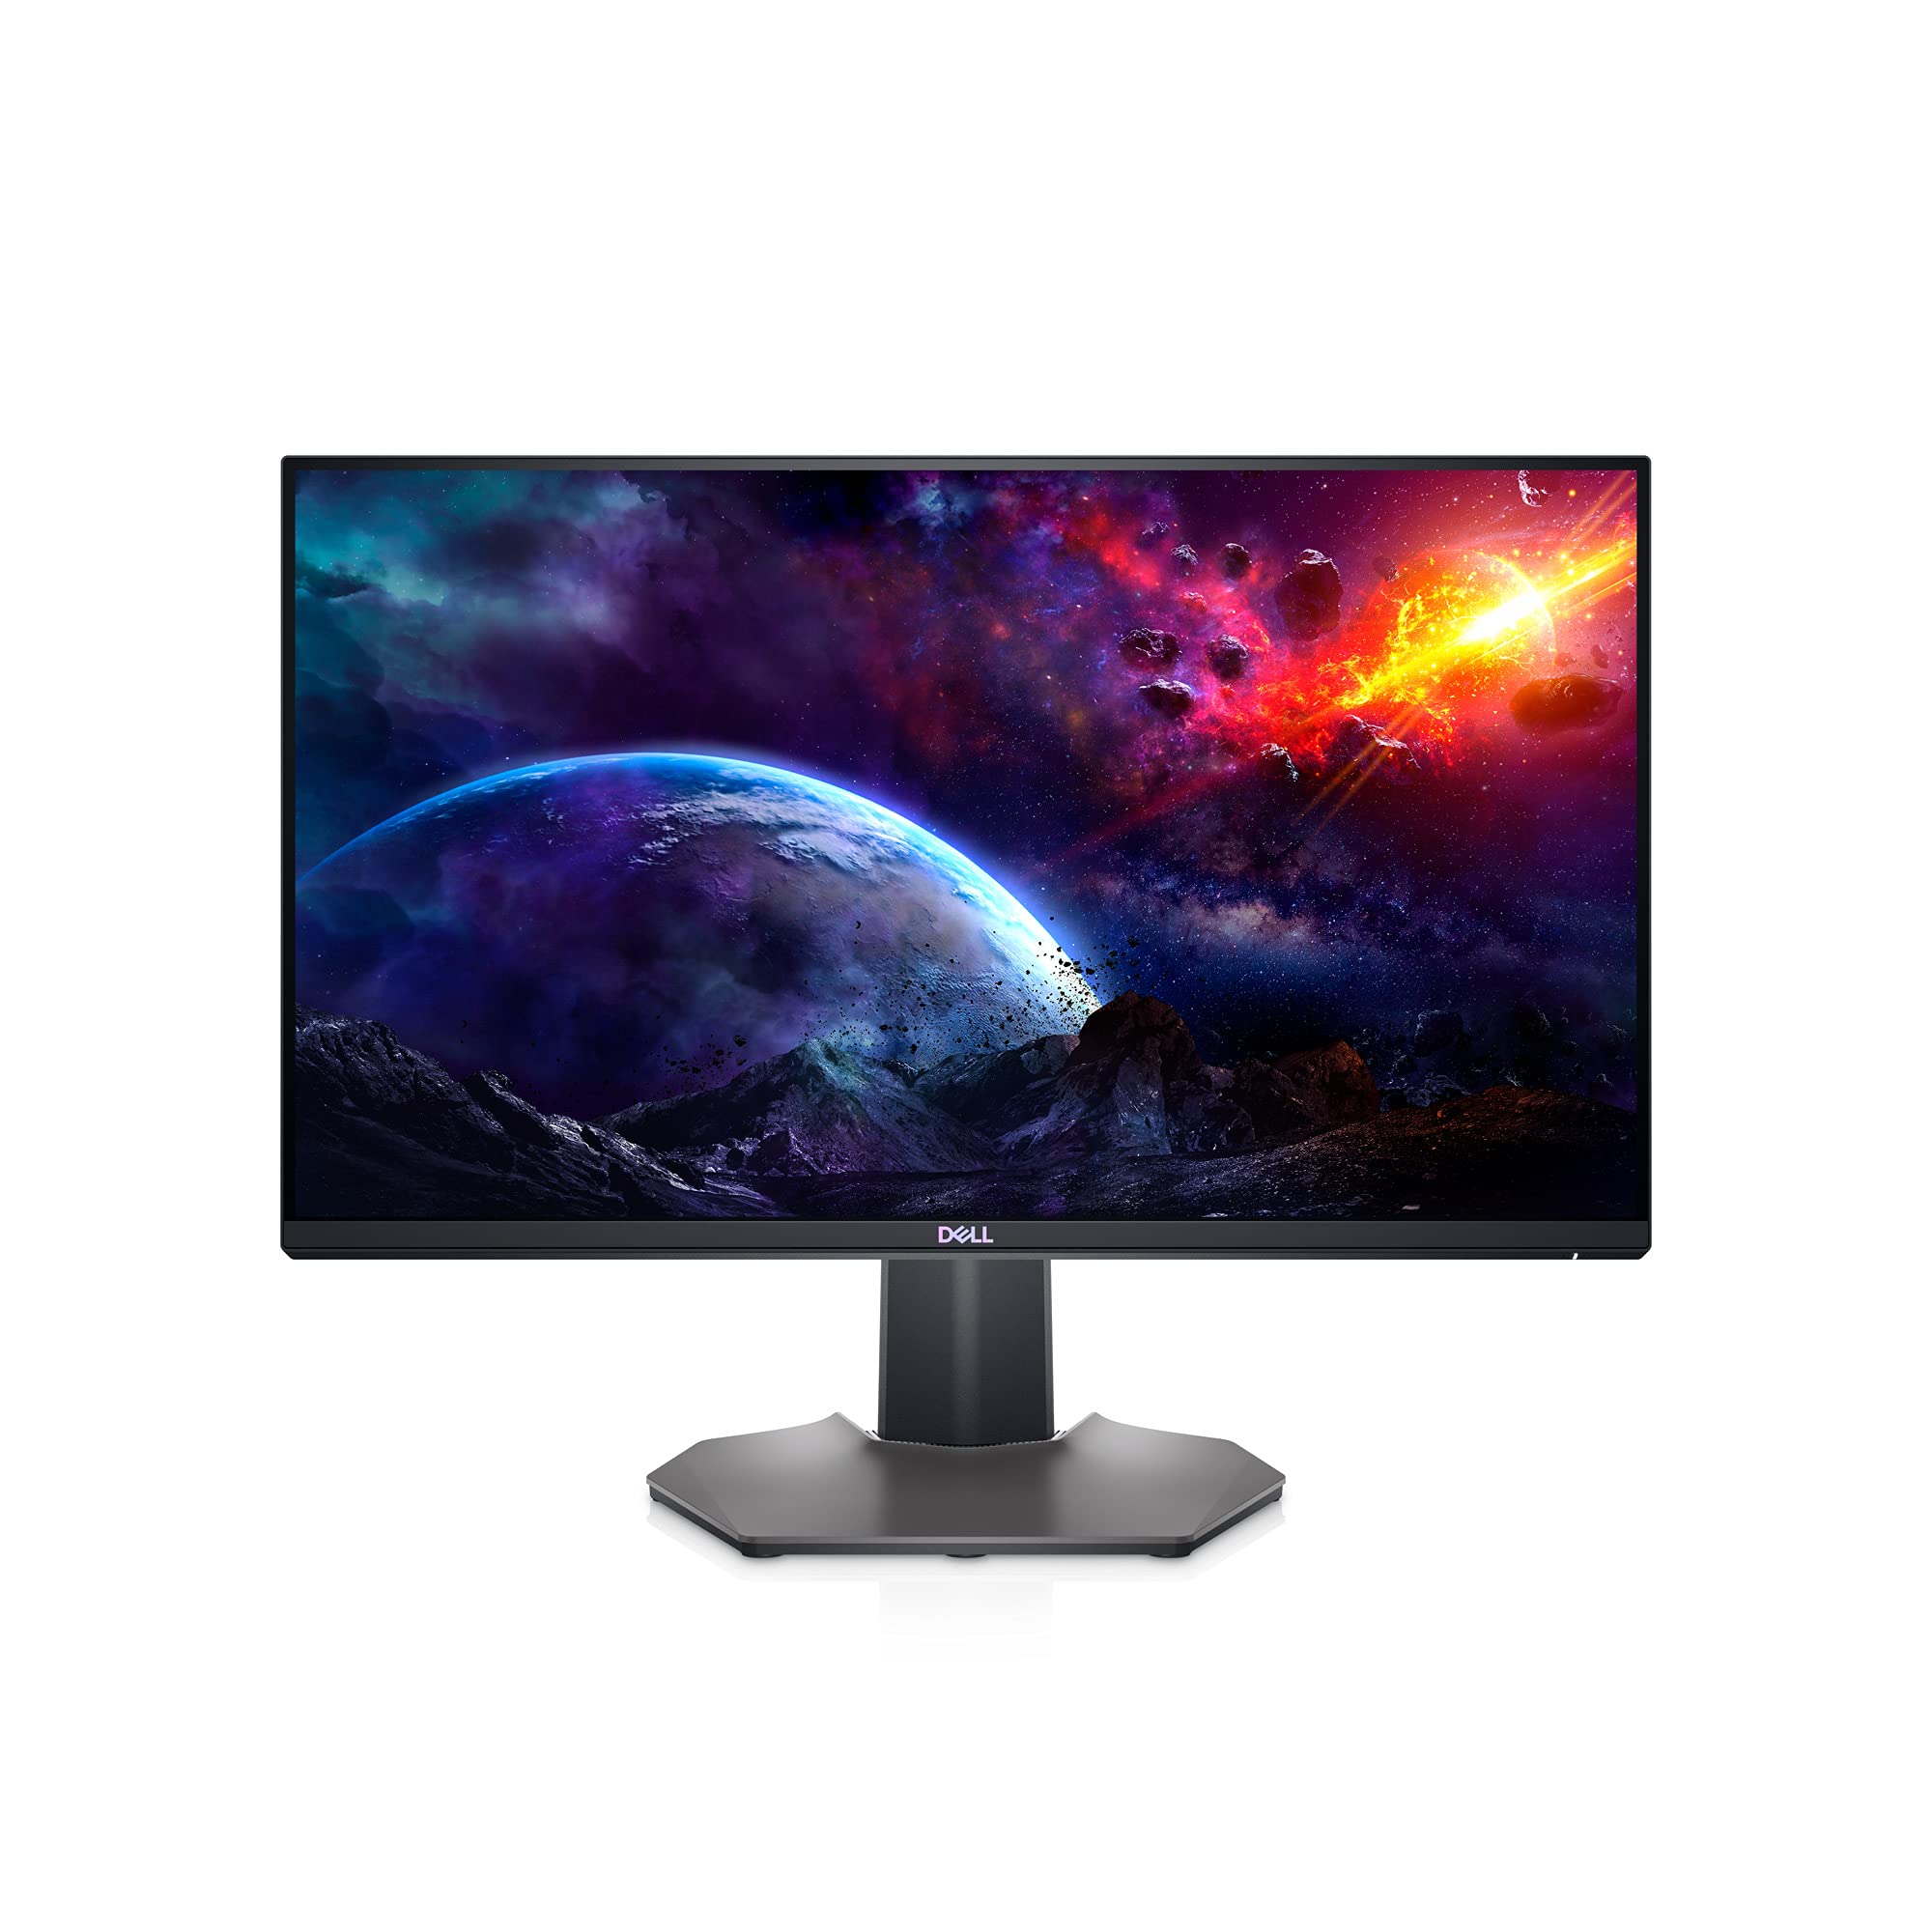 25" Dell S2522HG FHD Gaming Monitor, 240Hz, 1ms Response Time, Fast IPS Technology, 16.7 Million Colors $269.99 at Amazon